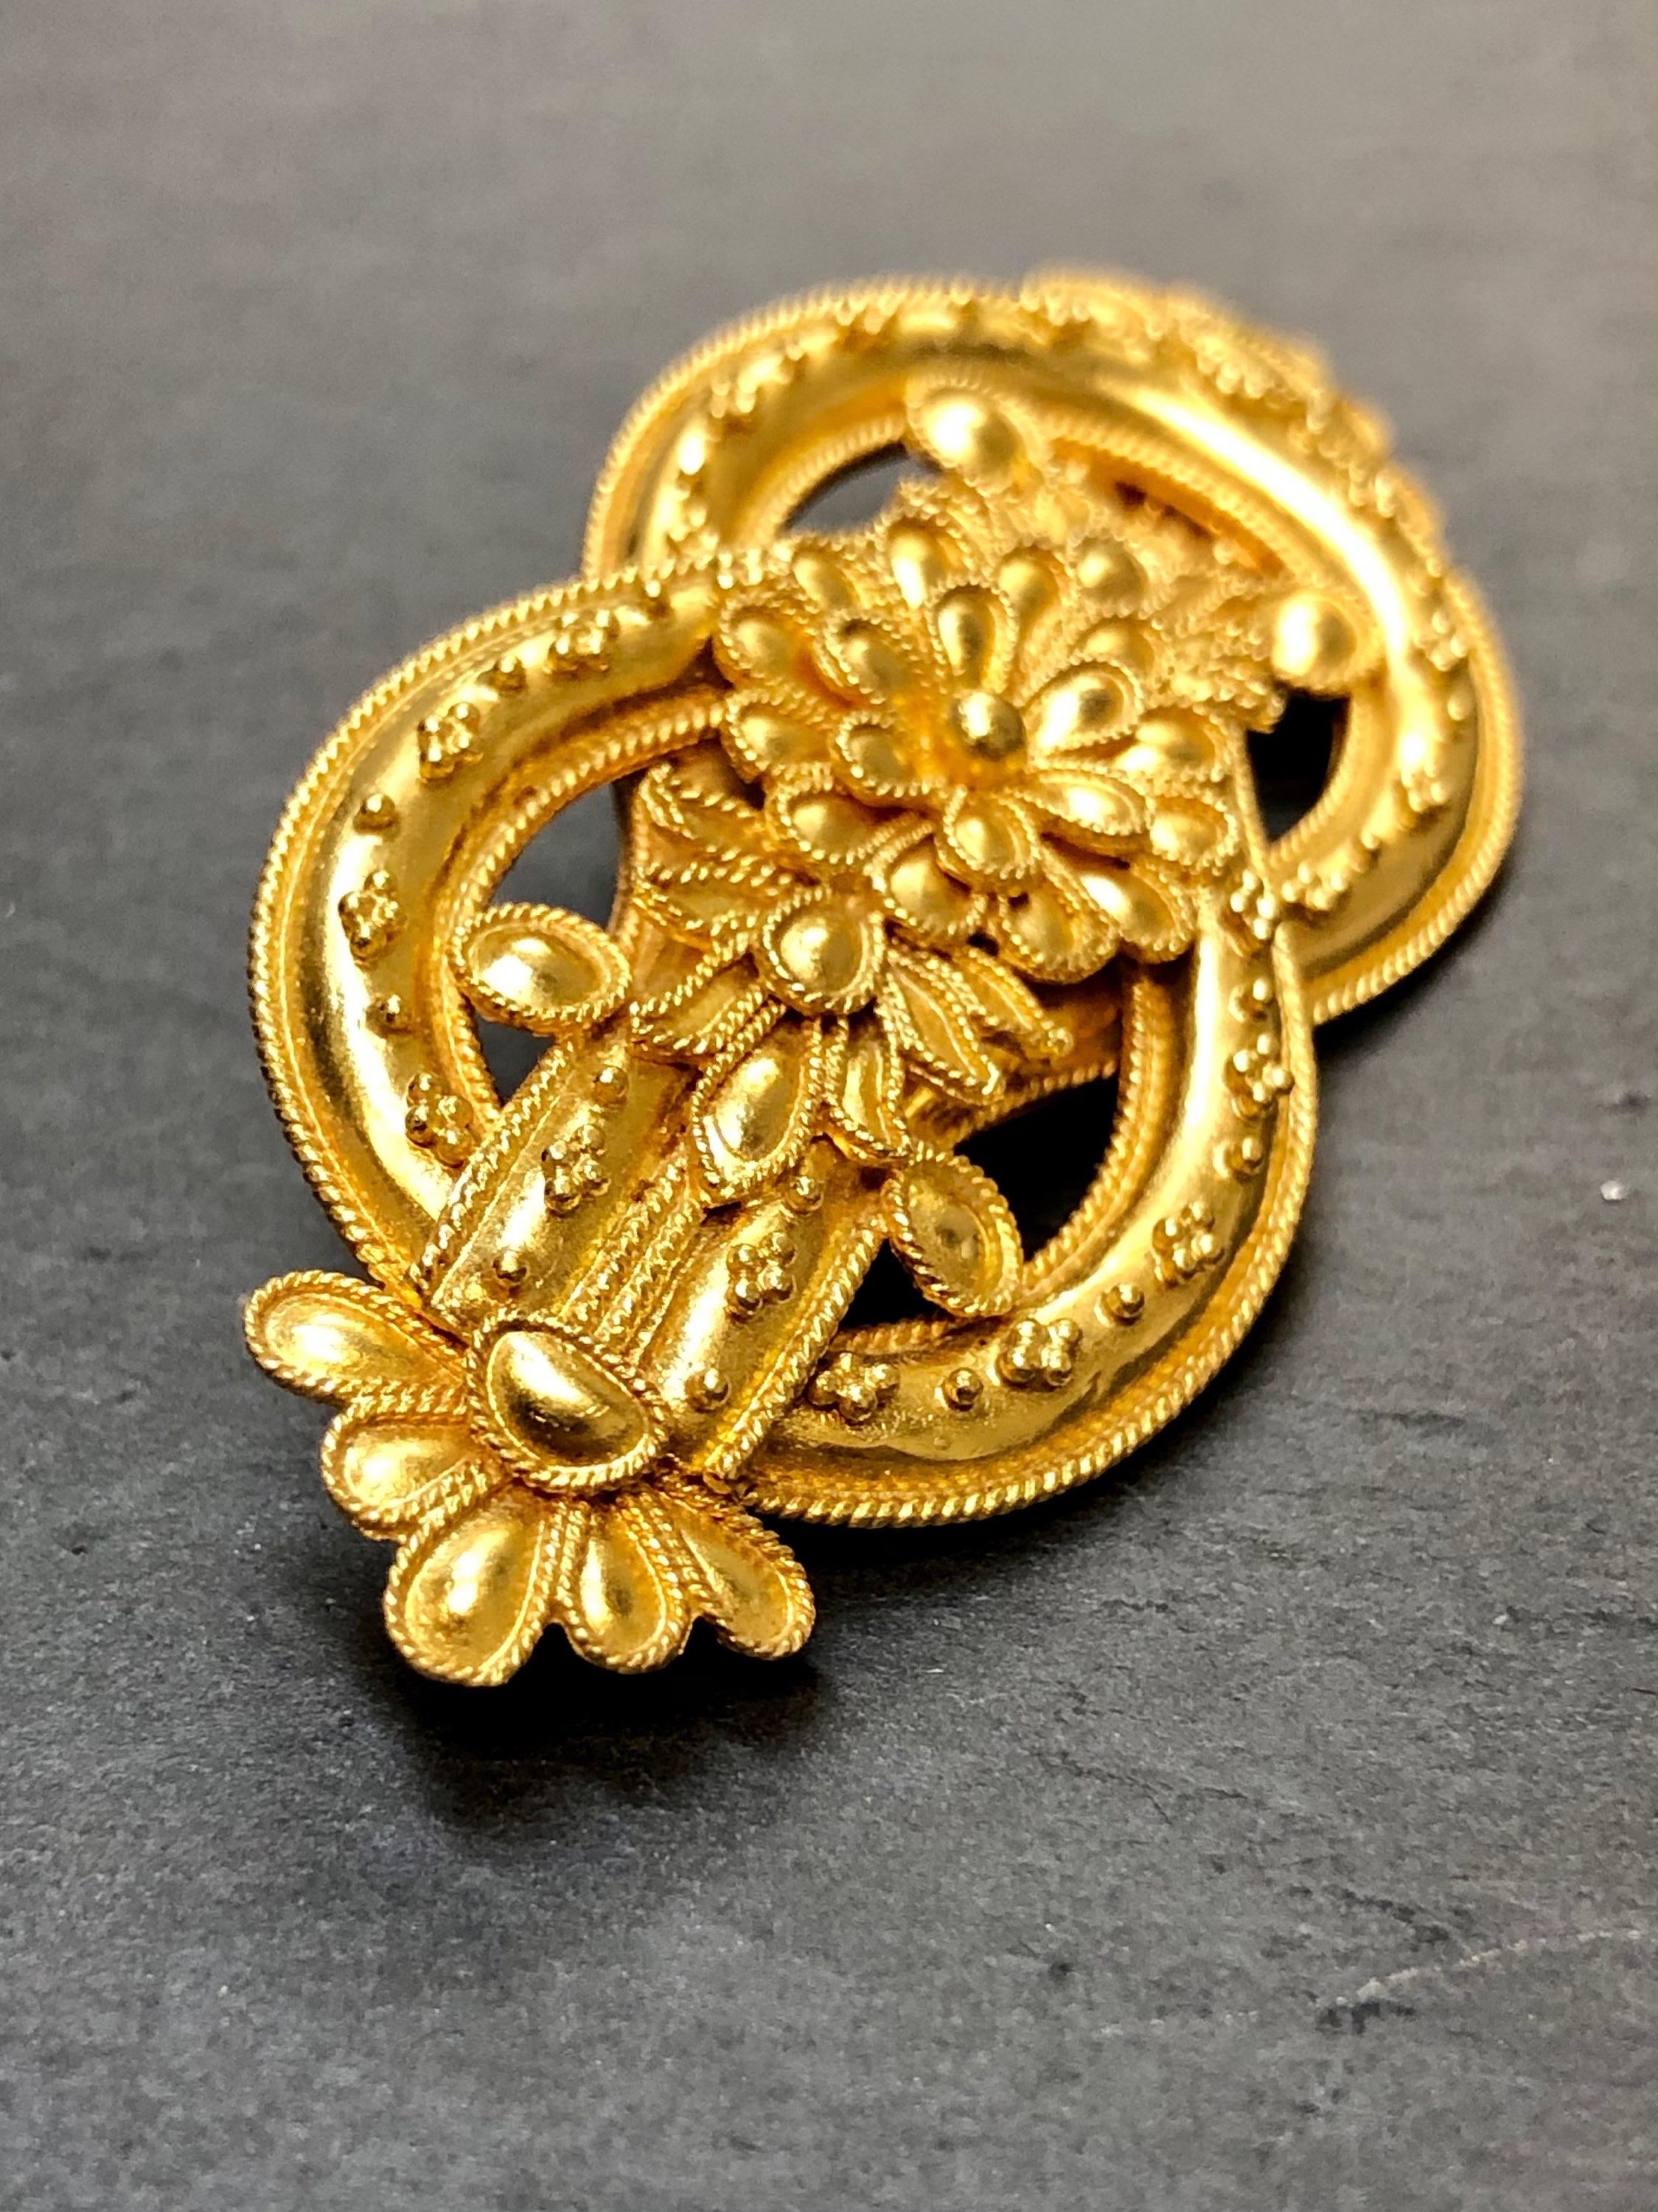 A beautiful interlocking “Etruscan” design brooch done by famed Greek designer Elias Lalaounis done in 18K. All hallmarks present.

Dimensions/Weight
2.1” by 1”. Weighs 10dwt.

Condition
Some surface scratches on back but all milgrain is undamaged